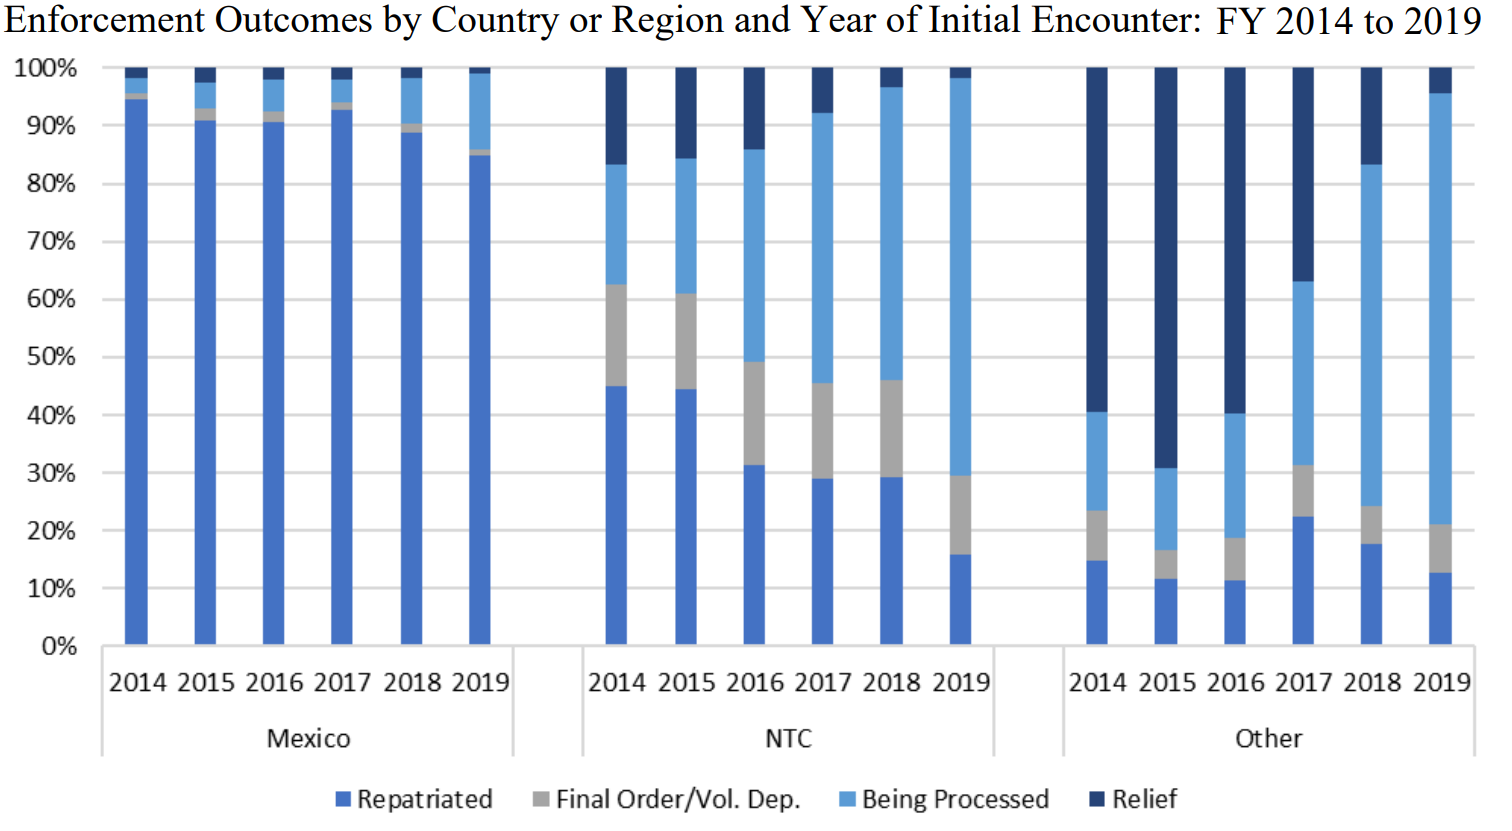 Graph: Enforcement Outcomes by Country or Region and Year of Initial Encounter - FY 2014 to 2019